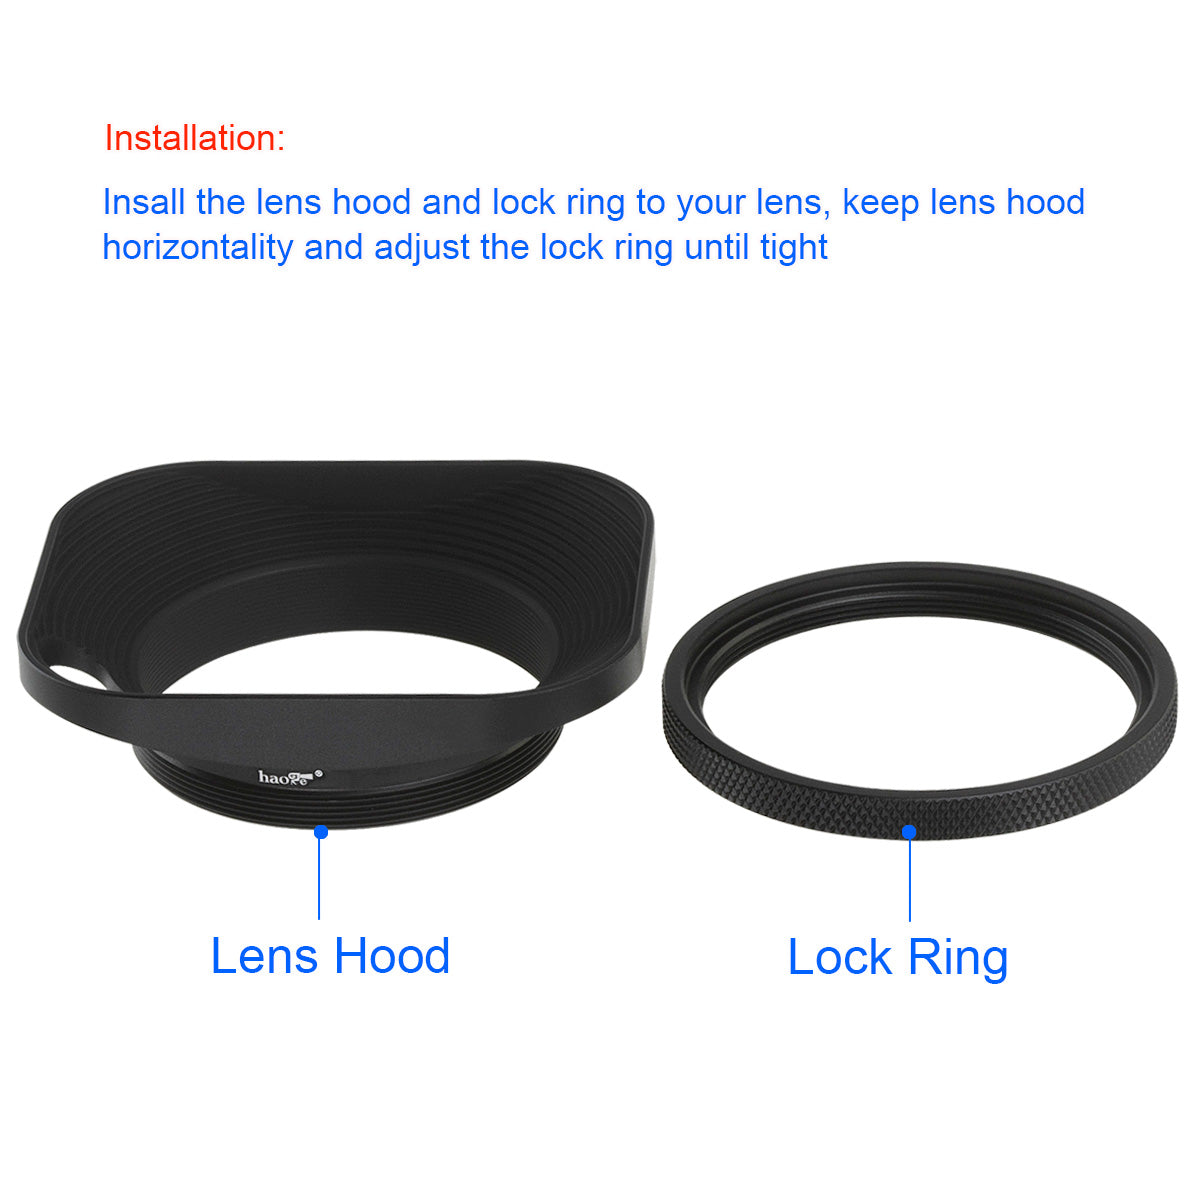 Haoge LH-B58P 58mm Square Metal Screw-in Lens Hood Hollow Out Designed with Cap for Leica Rangefinder Camera with 58mm E58 Filter Thread Lens Black